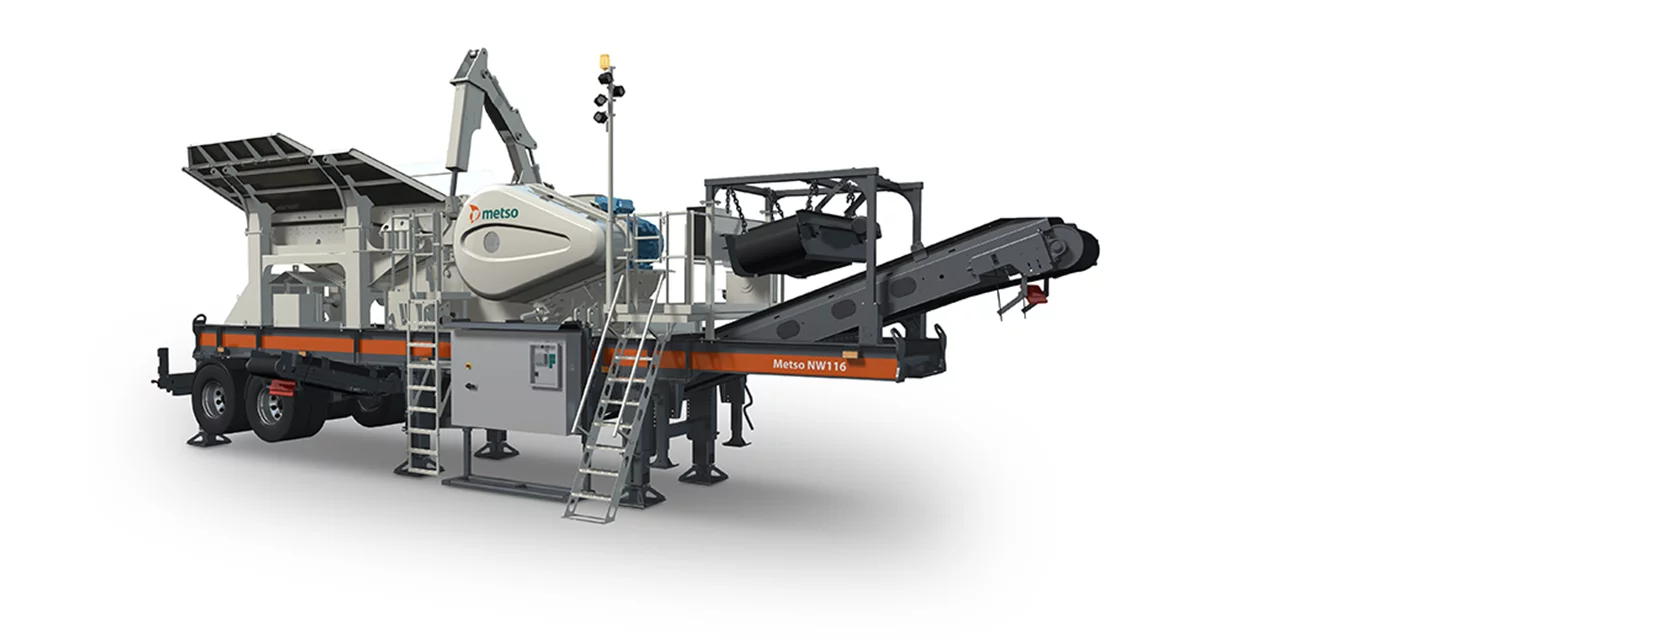 2020-01-09-22.06.50nw116-rapid-portable-jaw-crusher-plant.webp